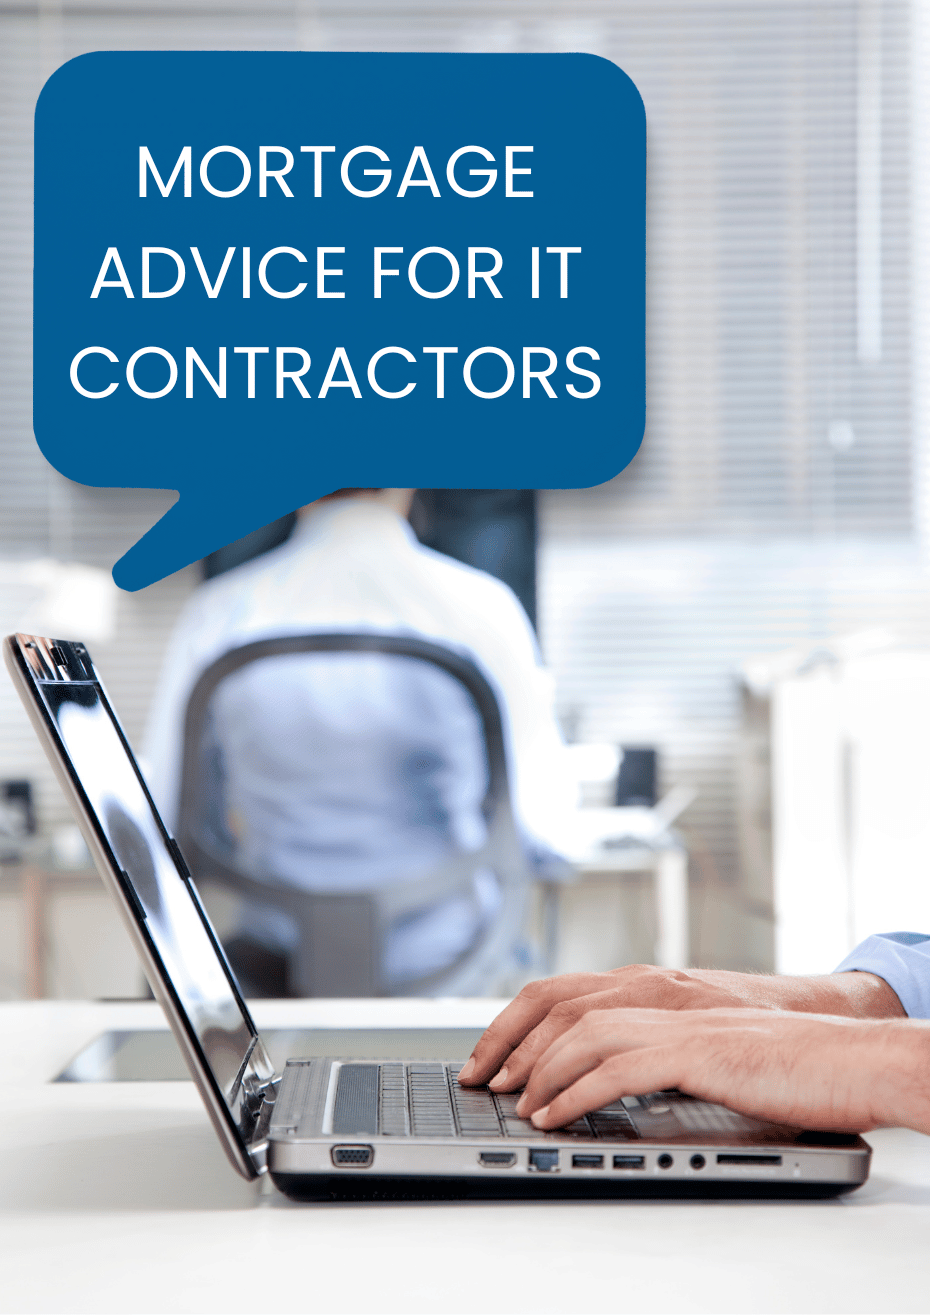 Mortgage Advice for IT Contractors